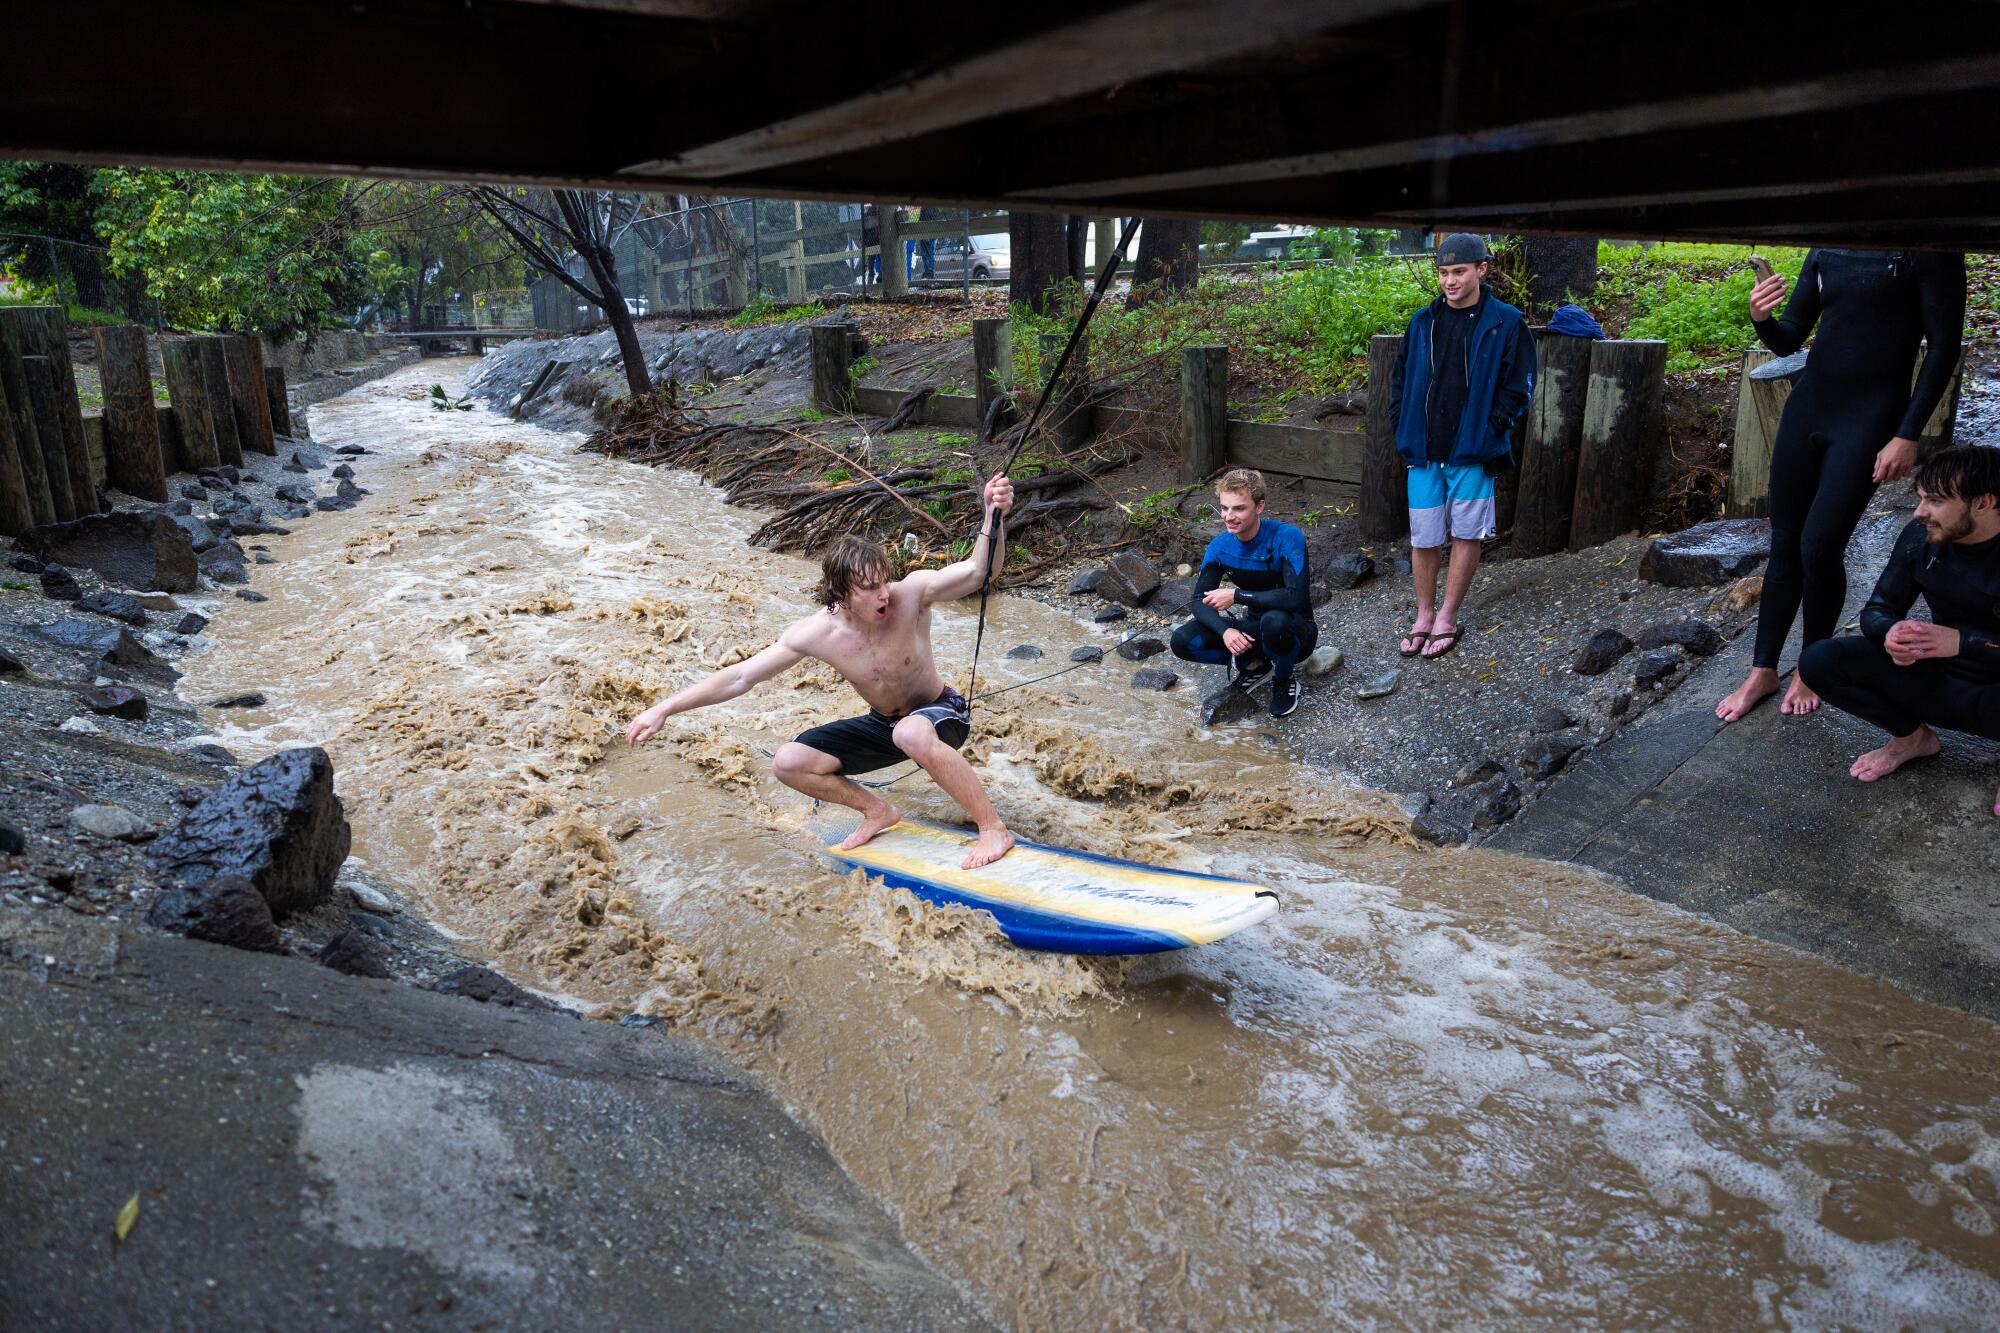 A man takes his turn using a rope from a footbridge to stay in position and surf stormwater.